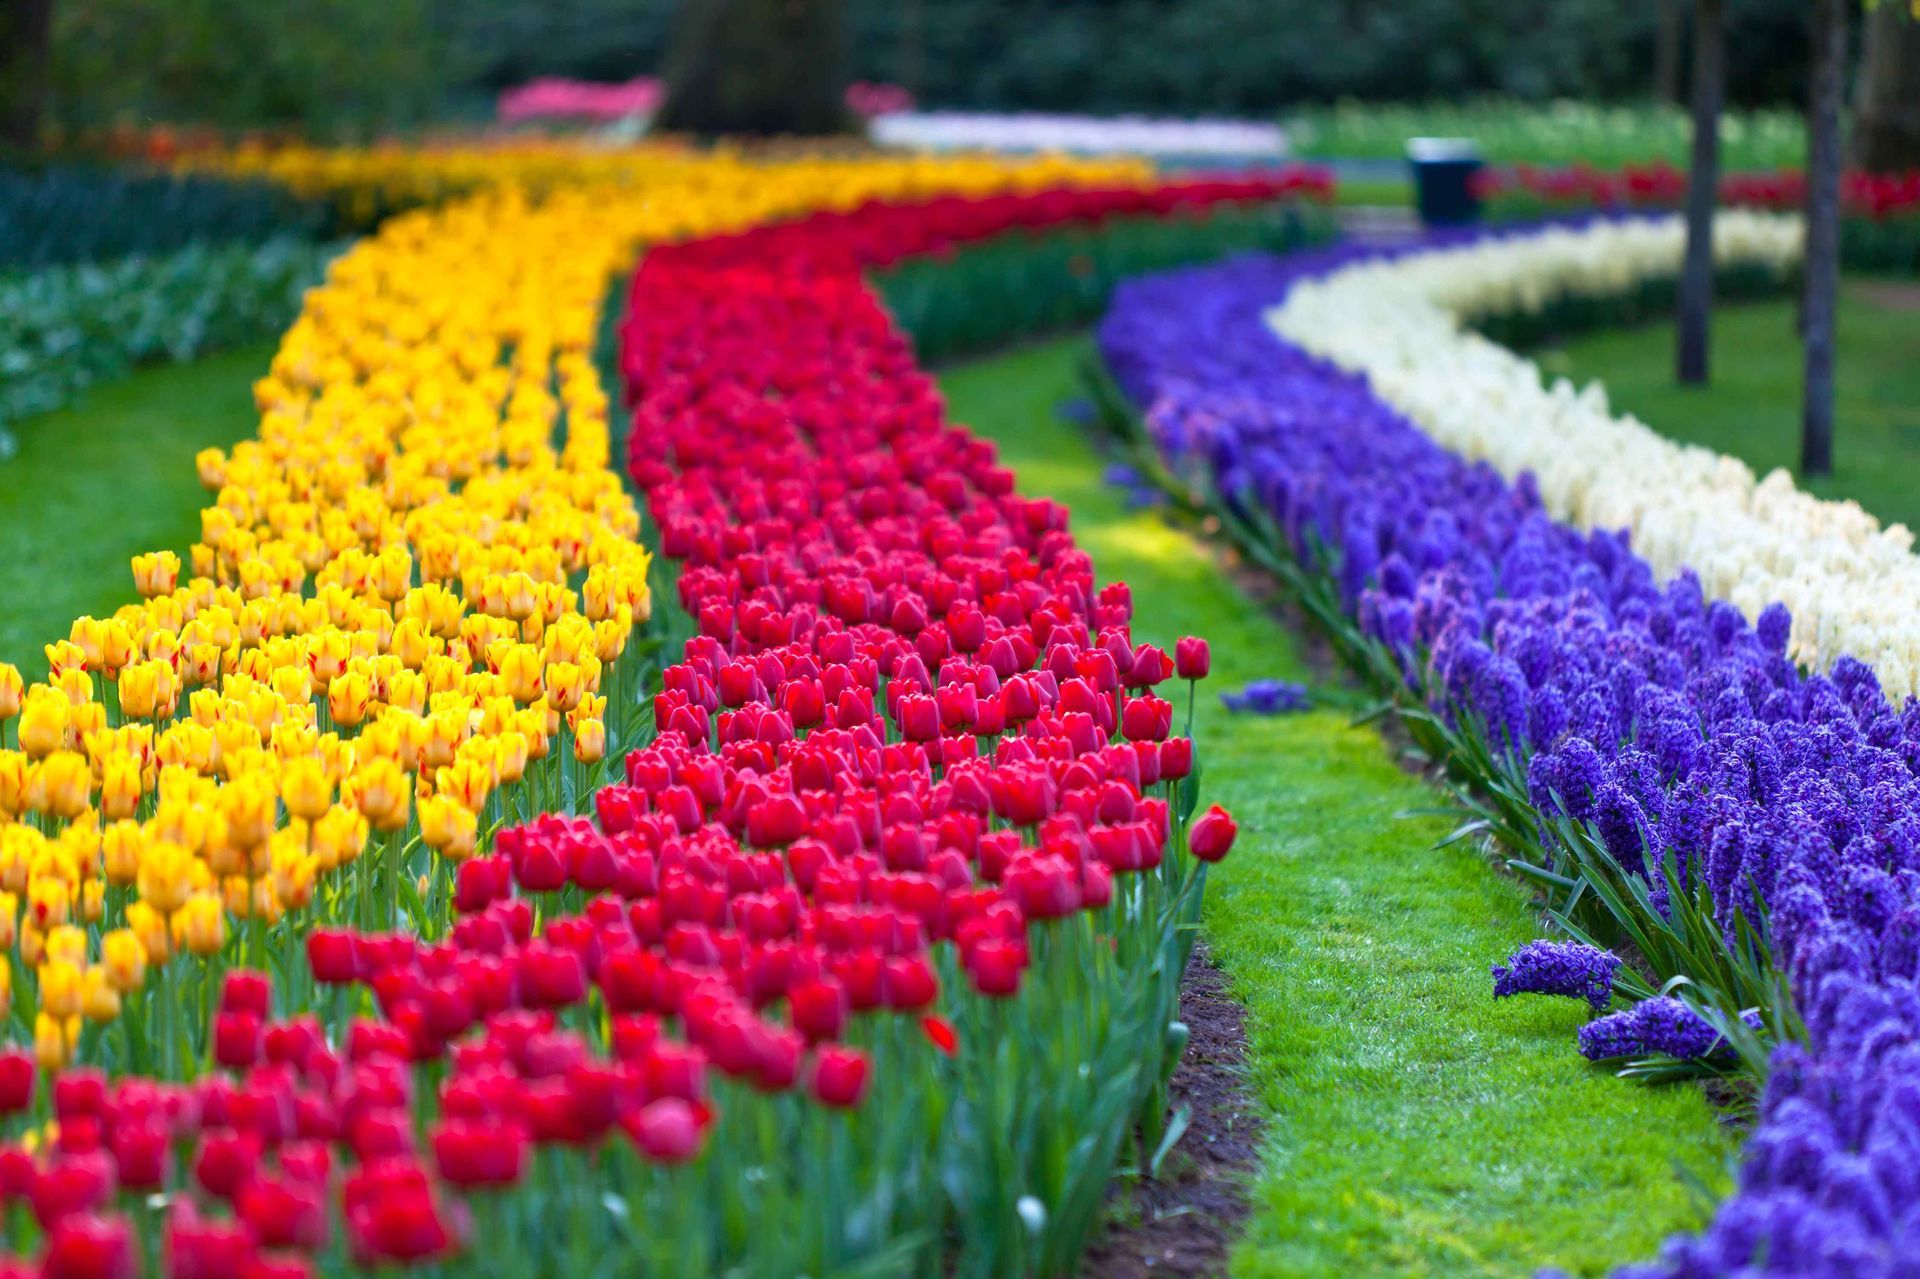 Gorgeous flowerbed with yellow, red, purple and white colors